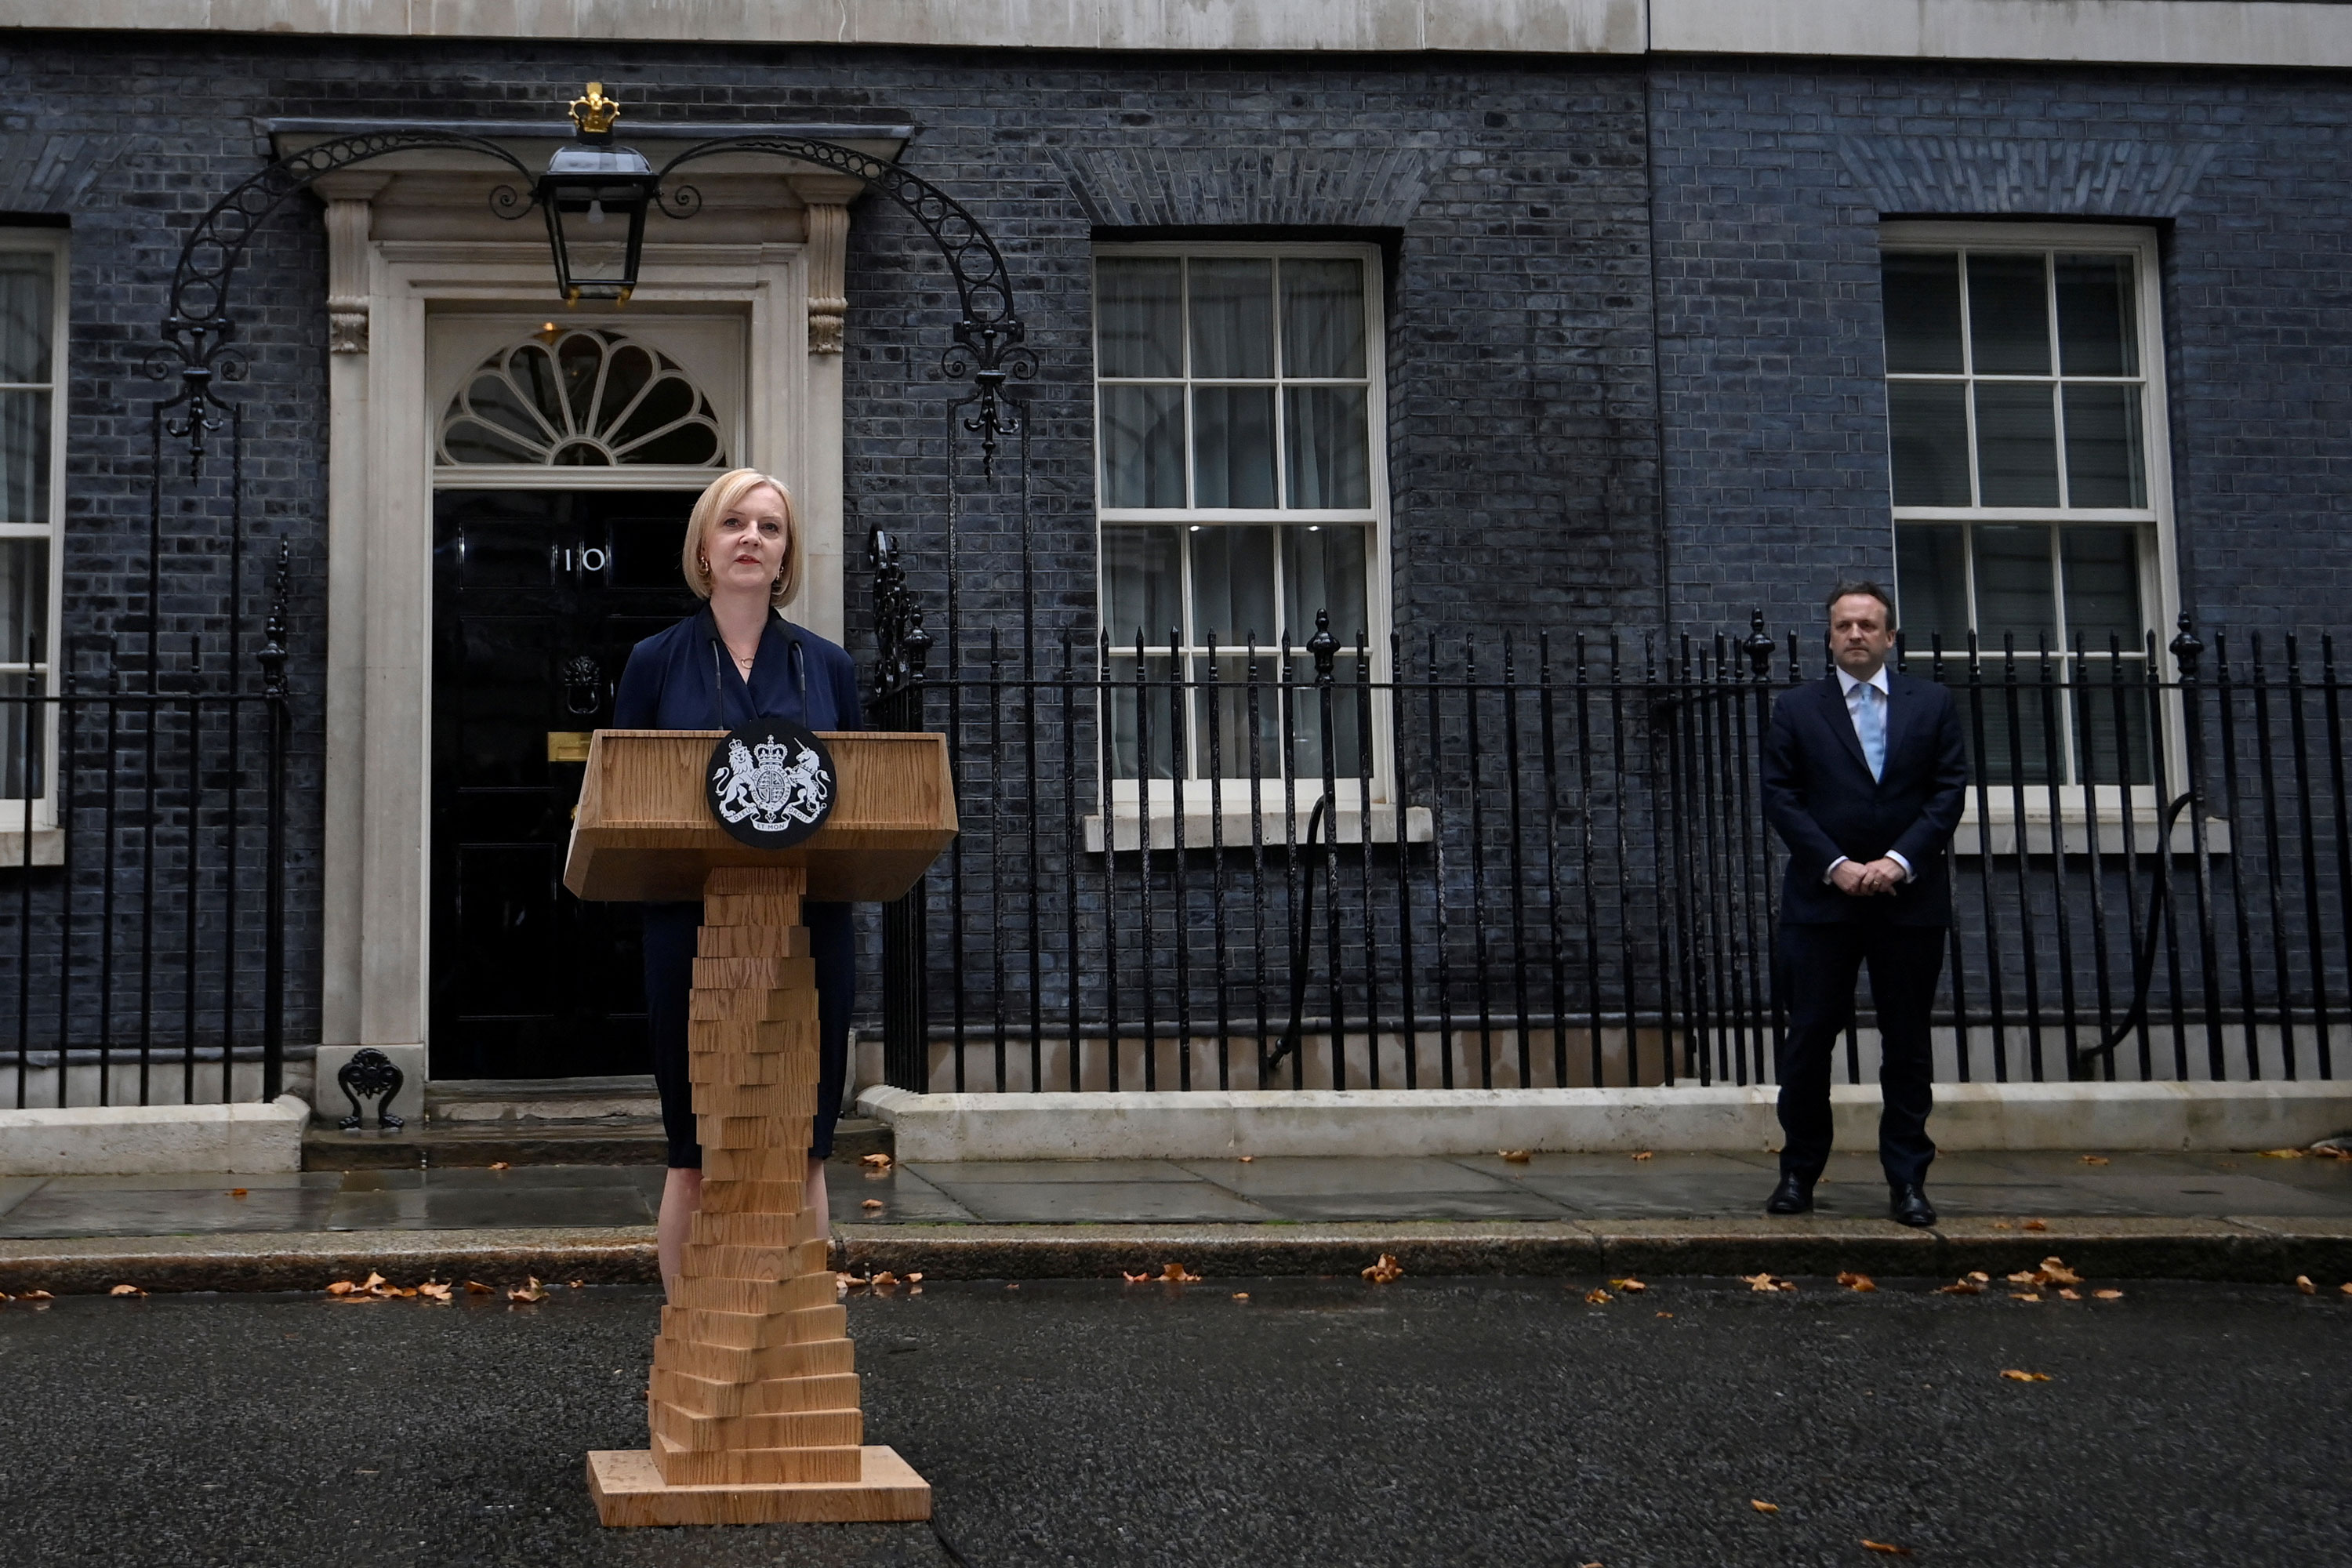 New British Prime Minister Liz Truss delivers a speech outside Downing Street as her husband Hugh O'Leary listens on Tuesday.